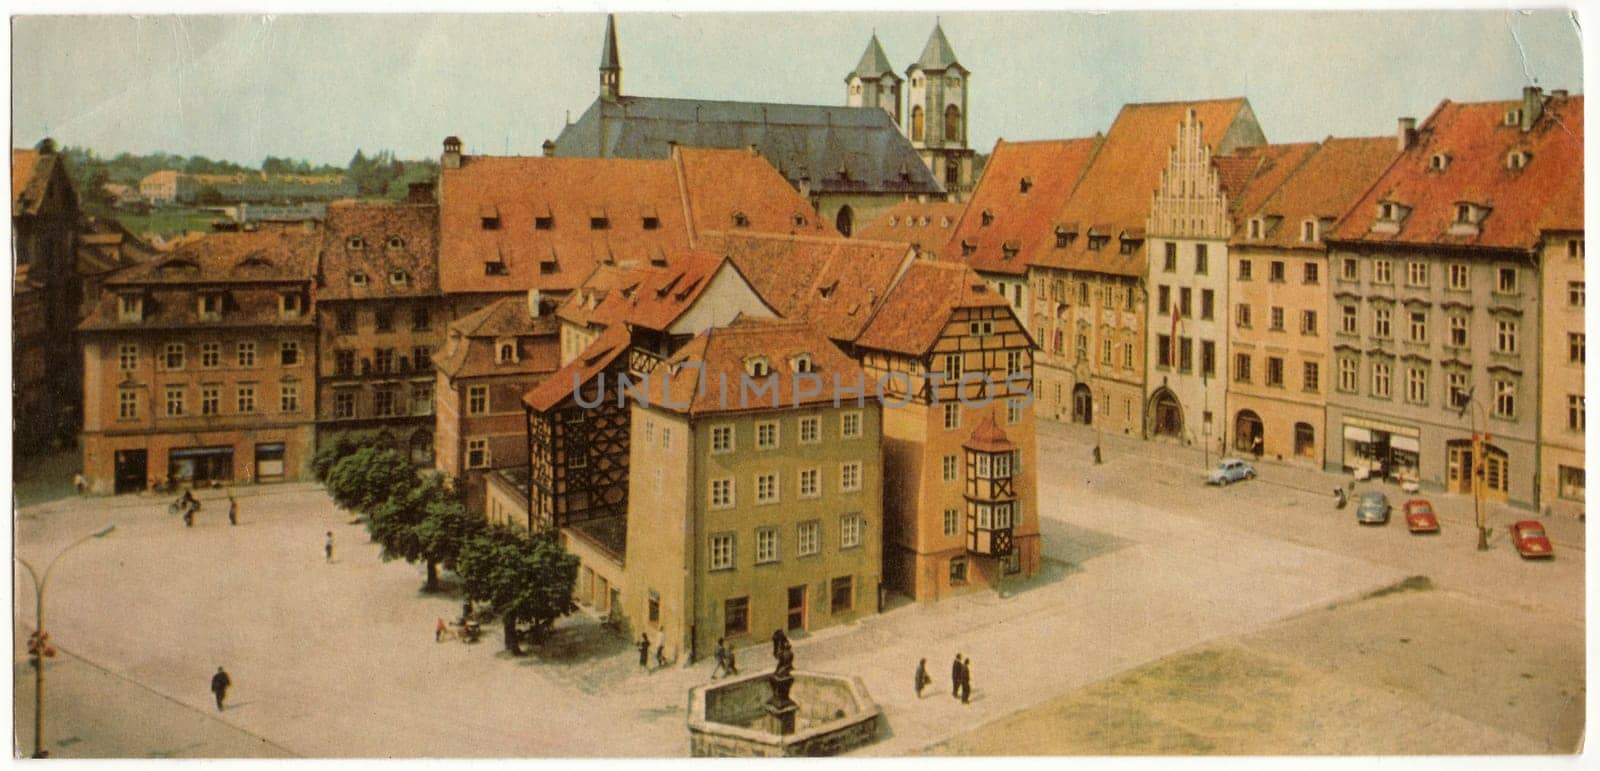 Vintage postcard shows group of medieval market-houses in Cheb. by roman_nerud